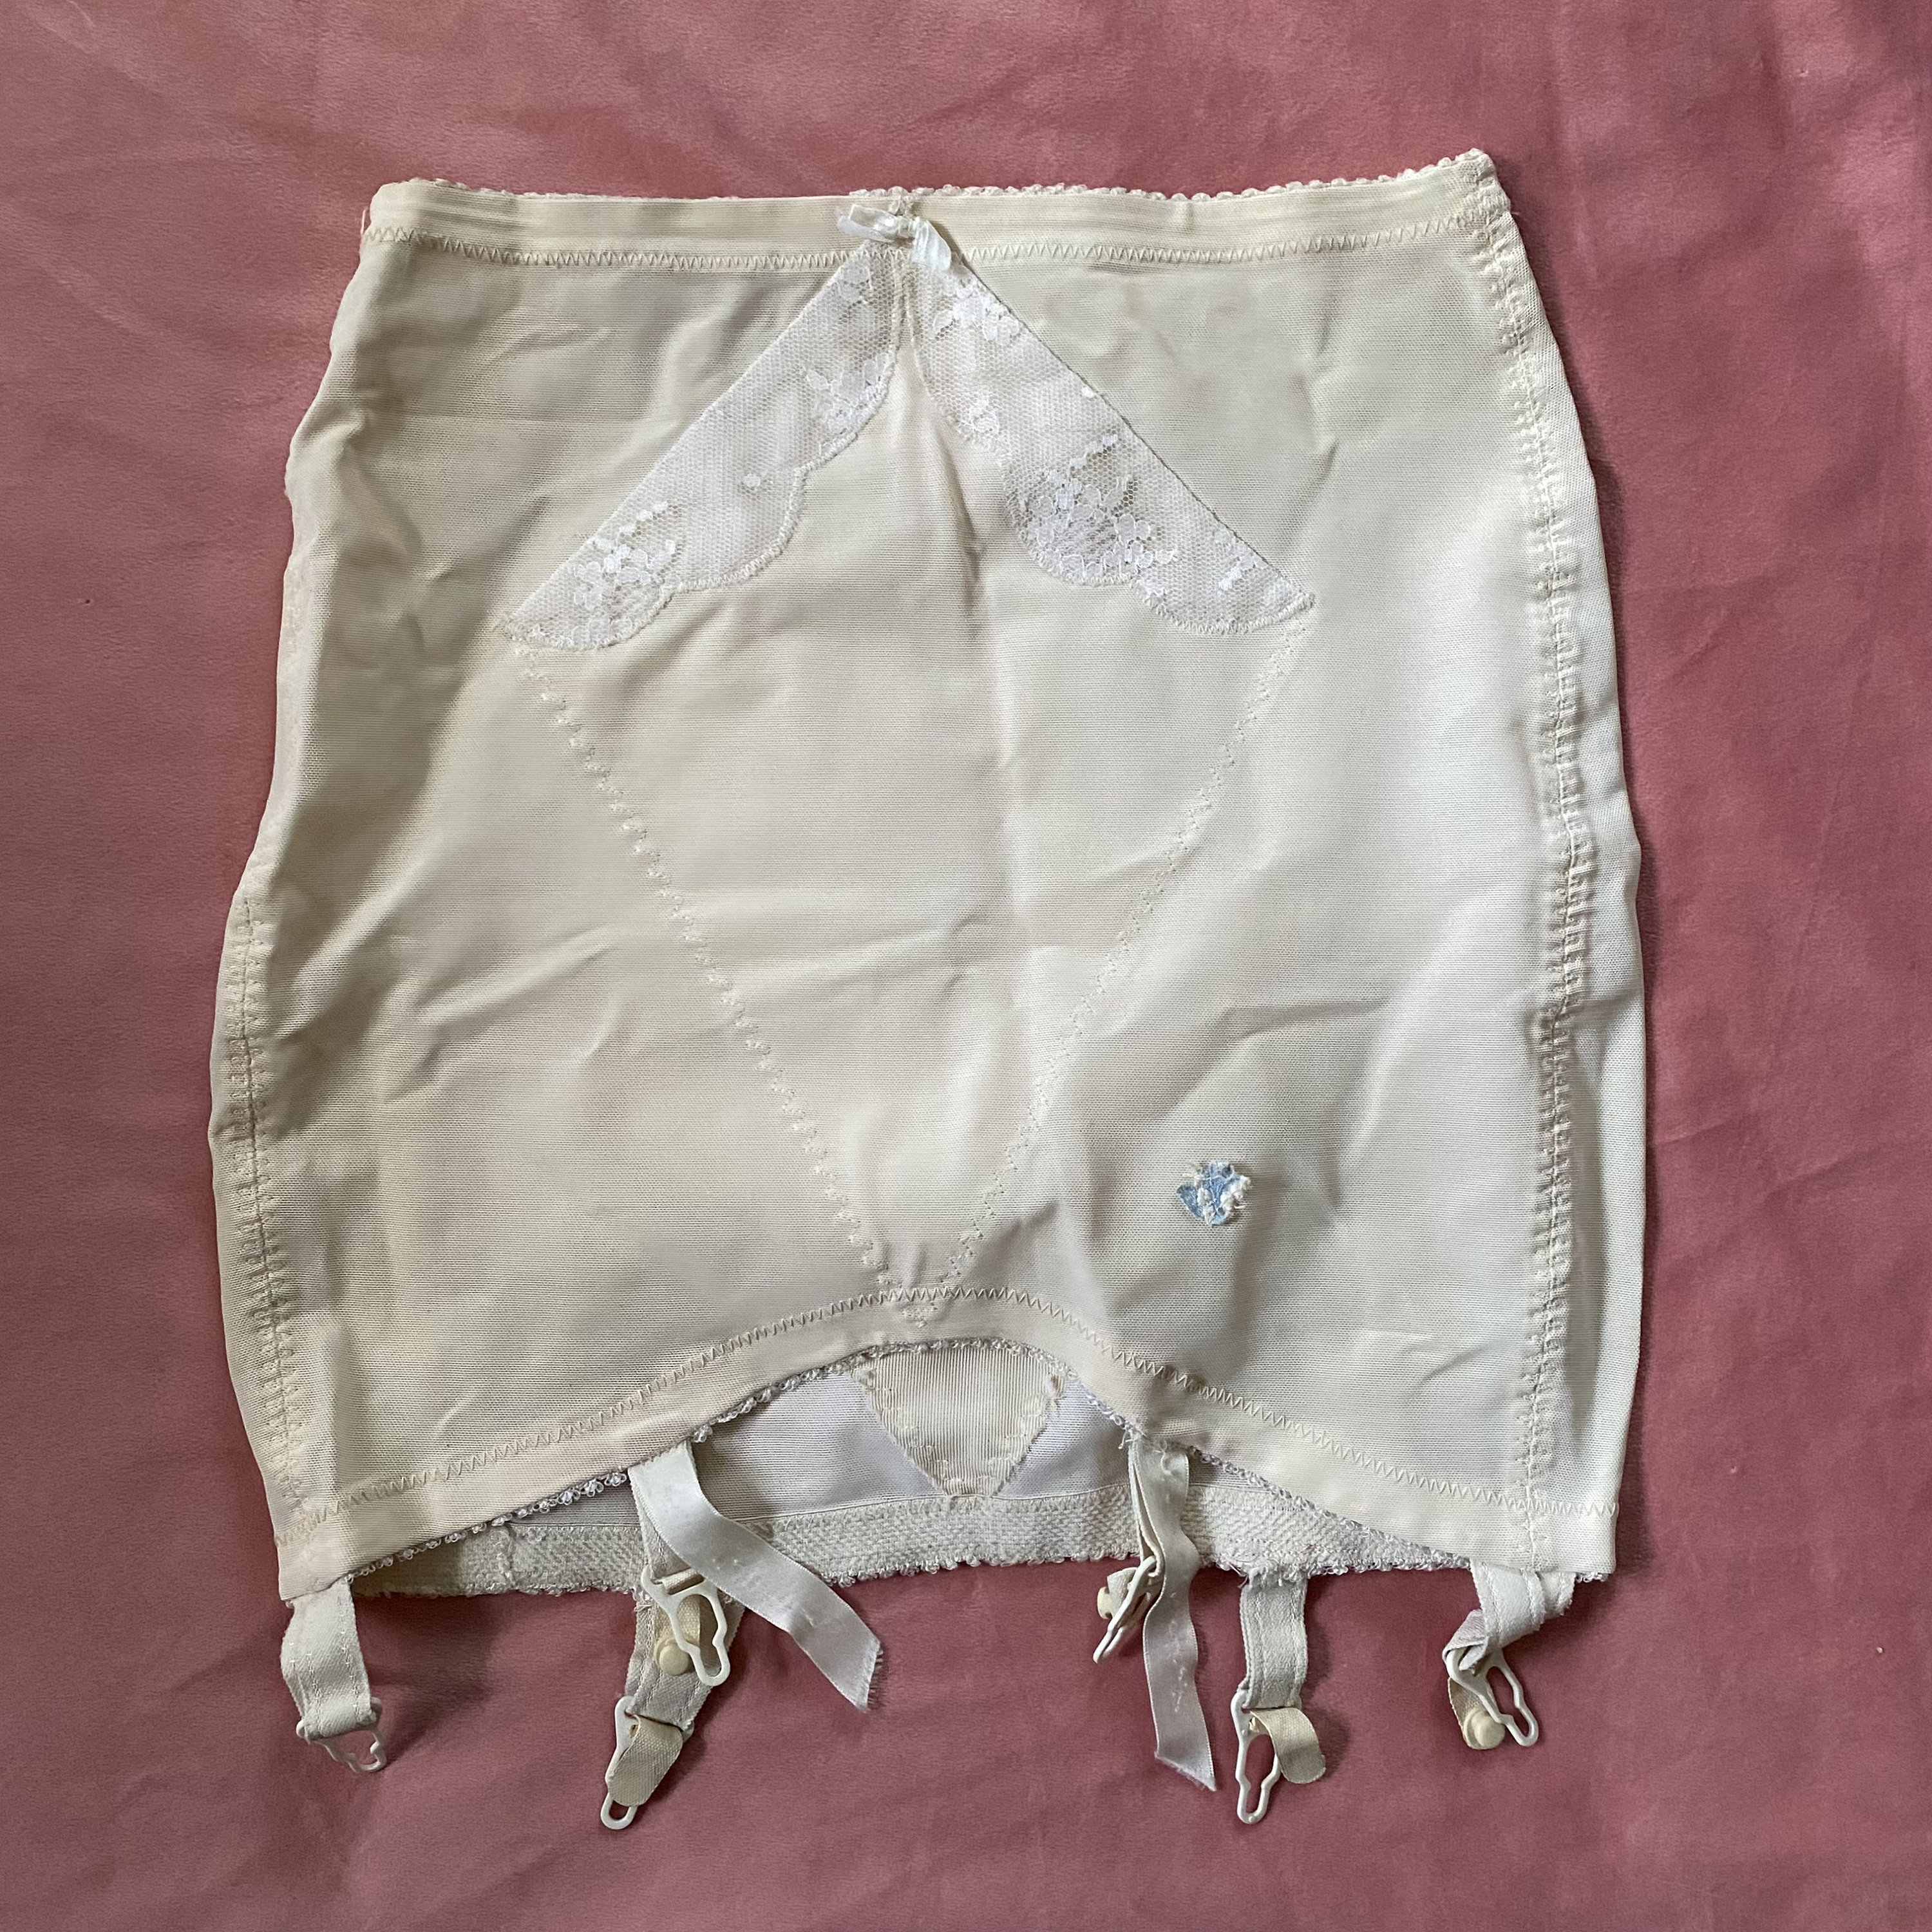 Vintage Lily of France Cuffed Firm Control Long Leg Girdle with Garters  White Medium (27-28)